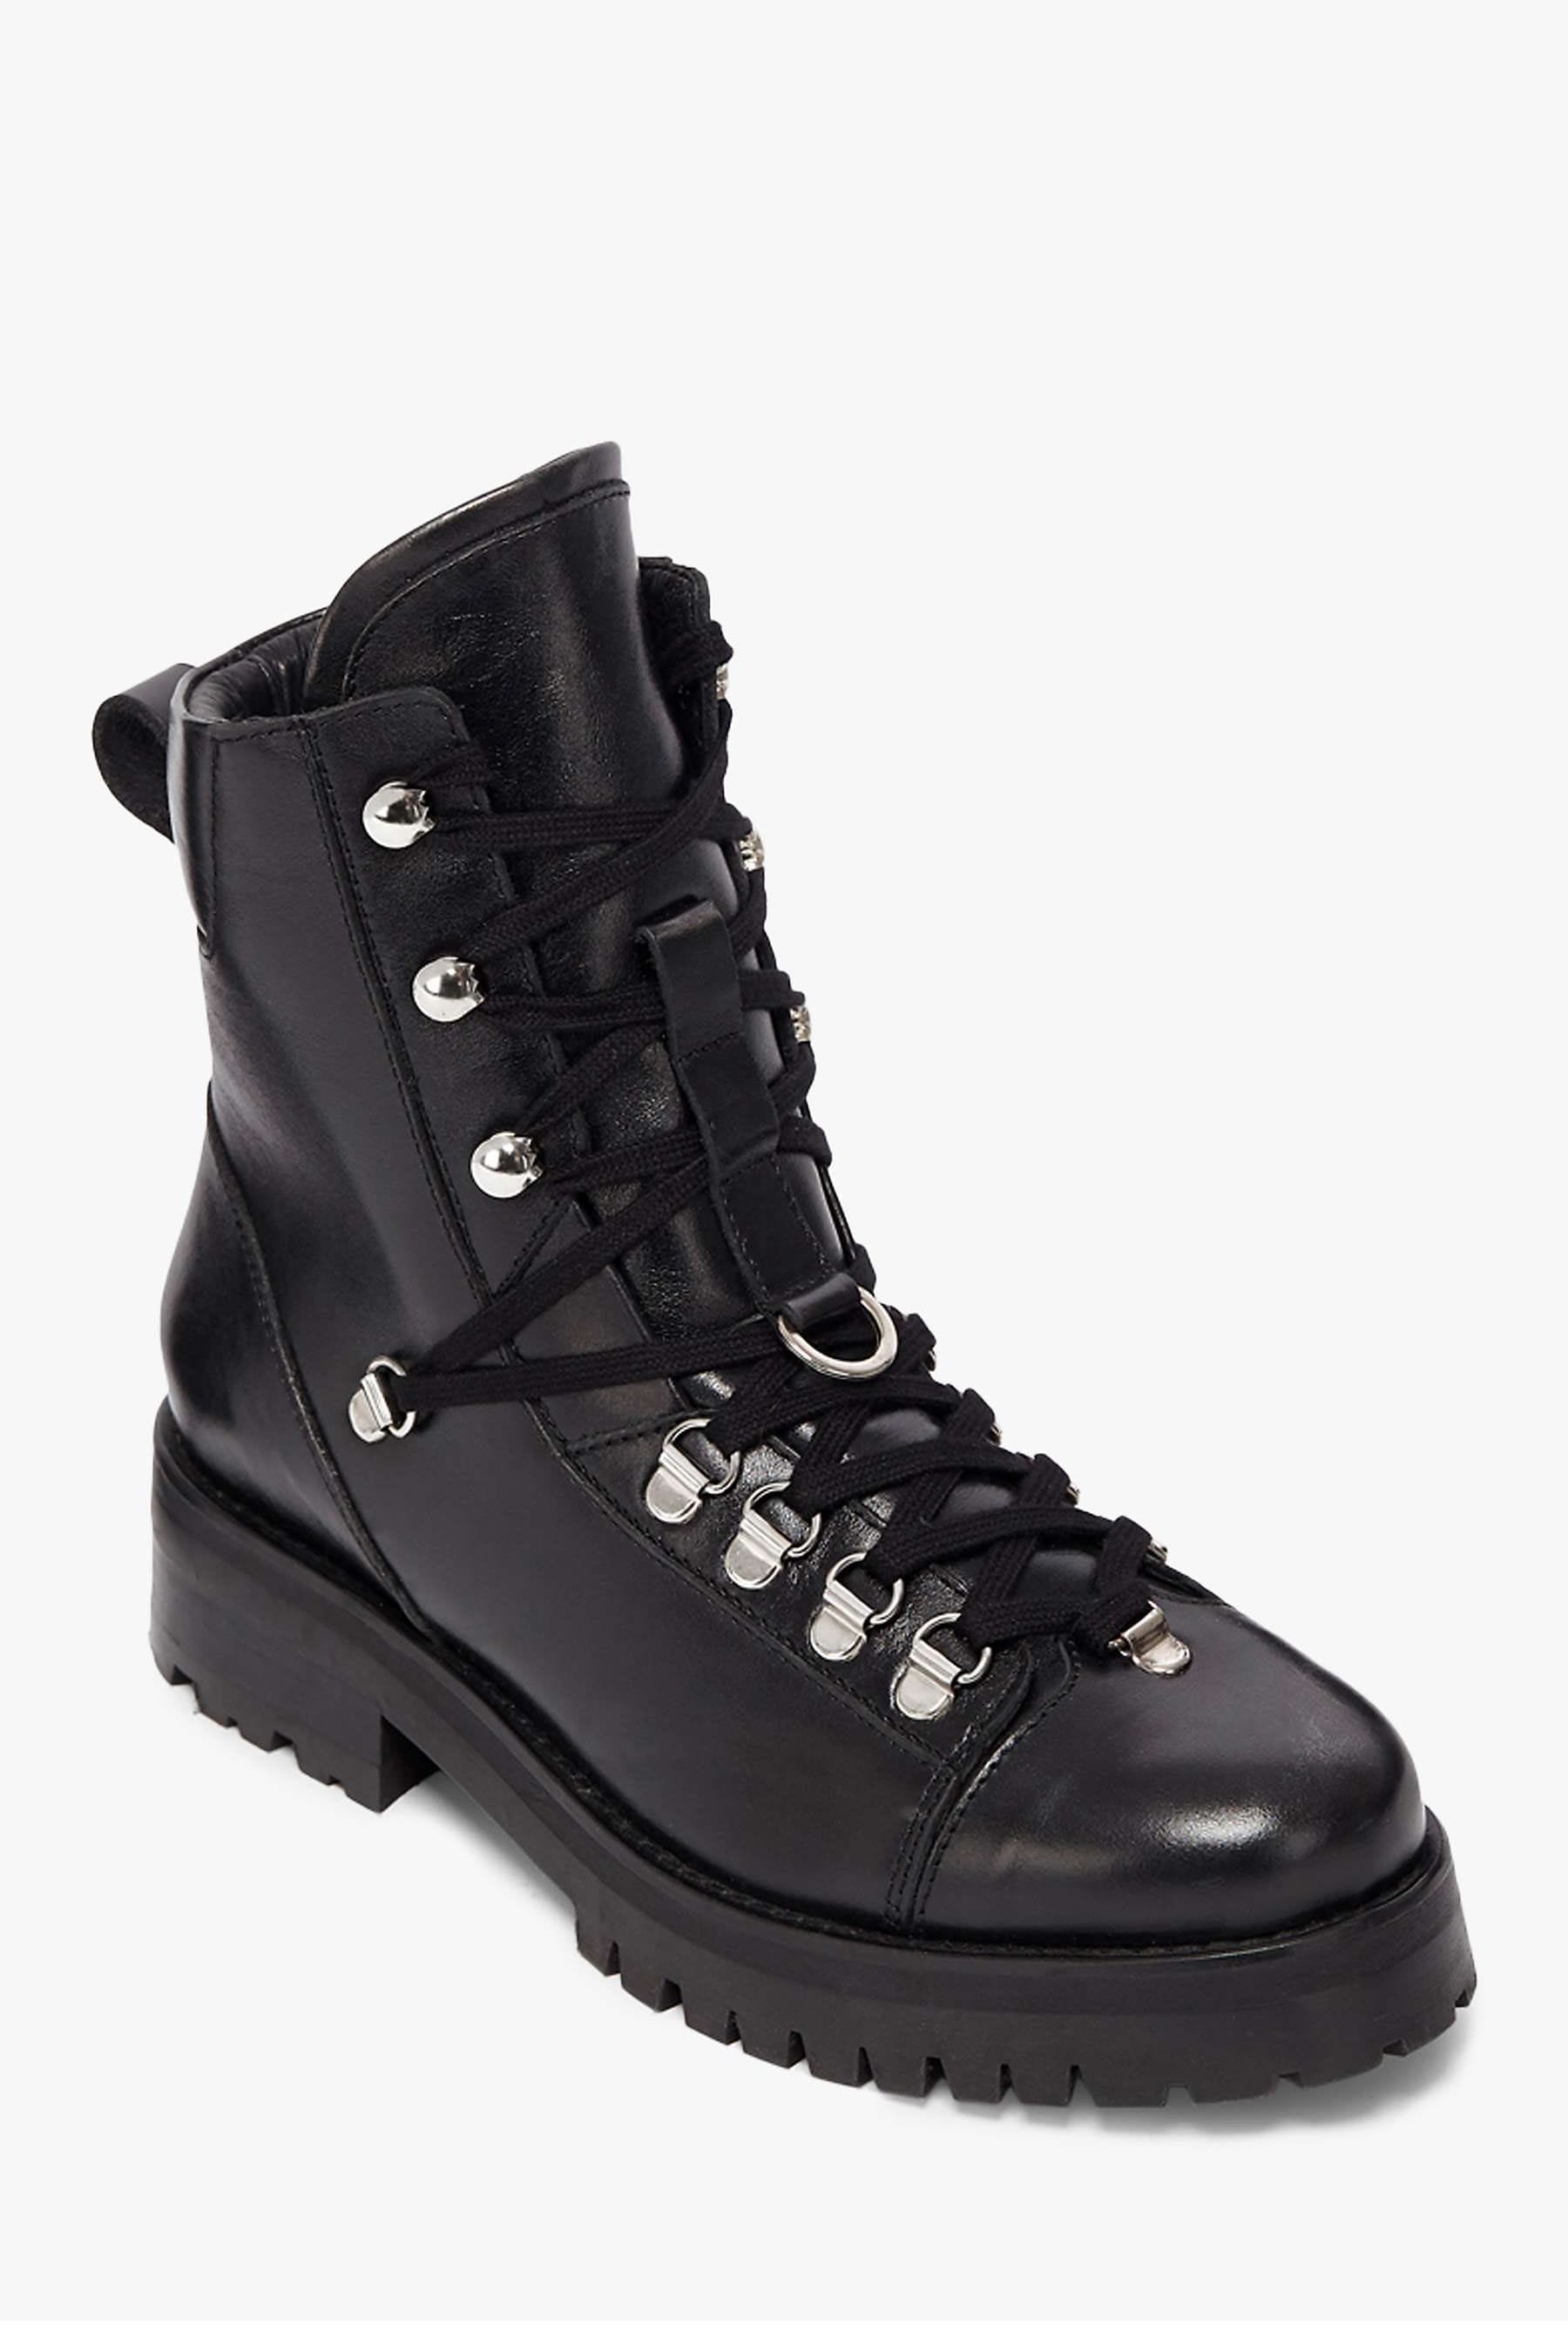 Buy AllSaints Black Franka Ankle Calf Boots from the Next UK online shop